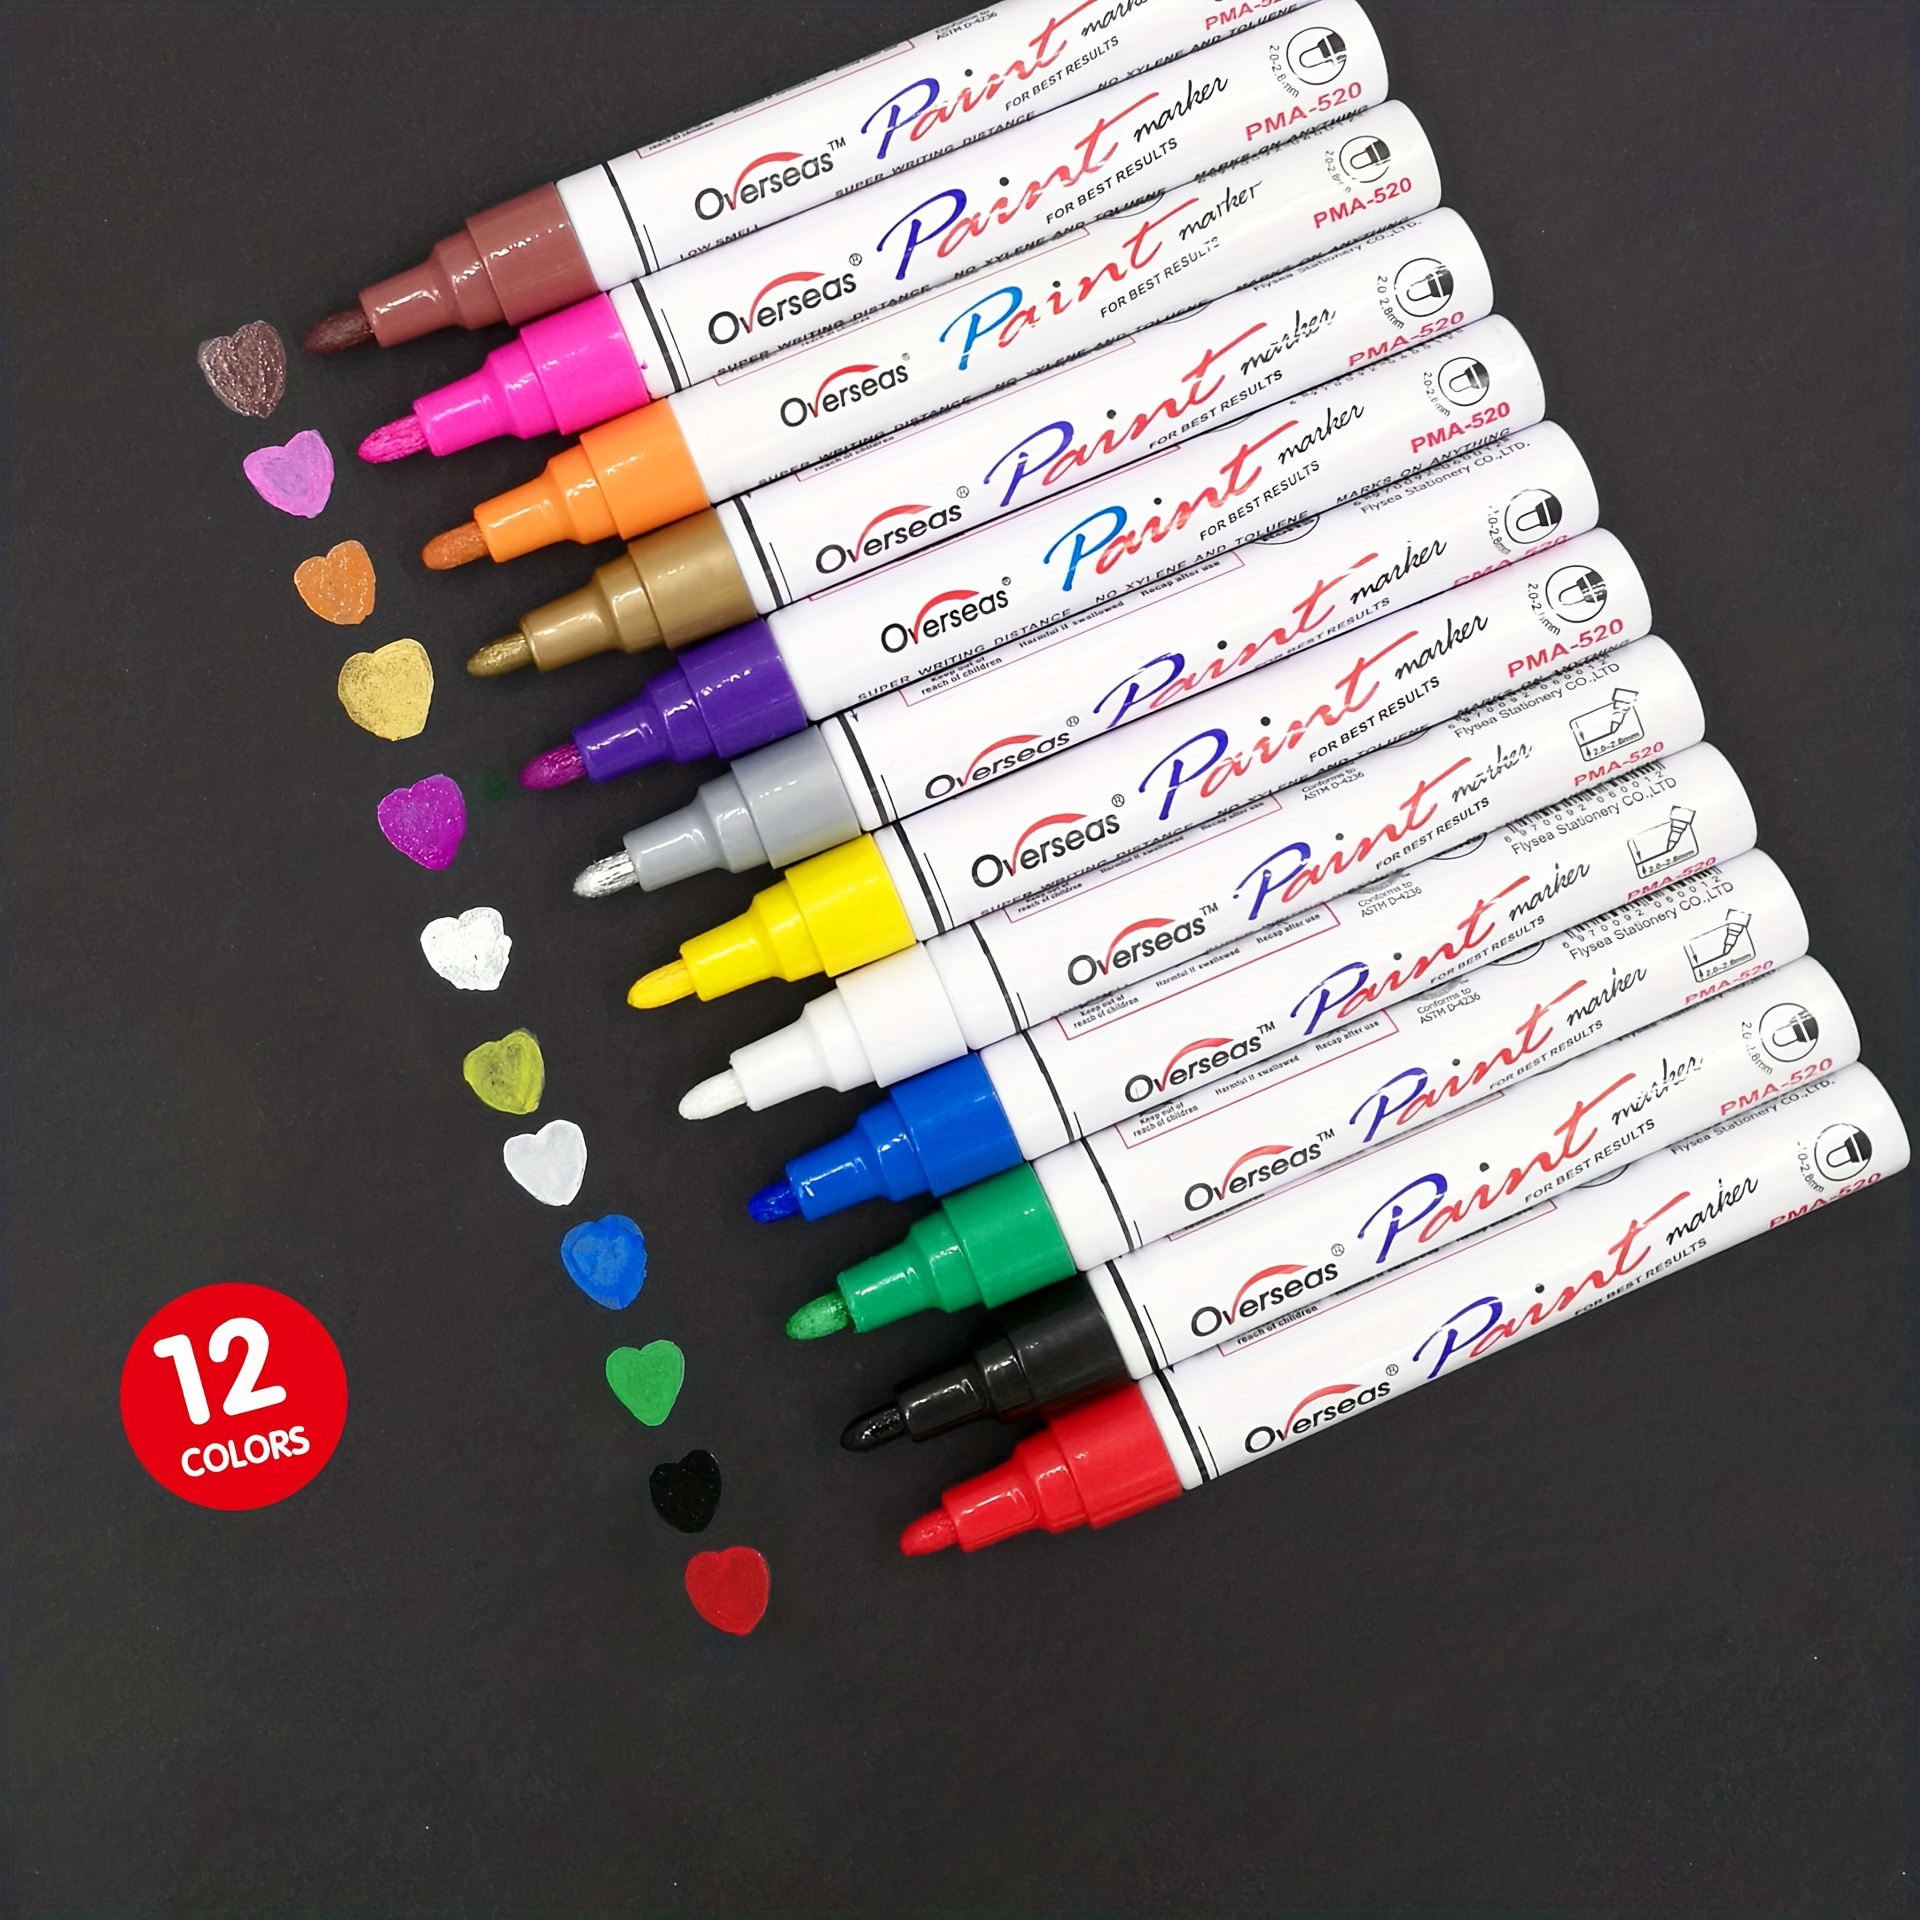 Paint Pens,Paint Markers 20 Pack Oil-Based Painting Pen Set for Rocks  Painting Wood Plastic Canvas Glass Mugs DIY Craft — emooqi